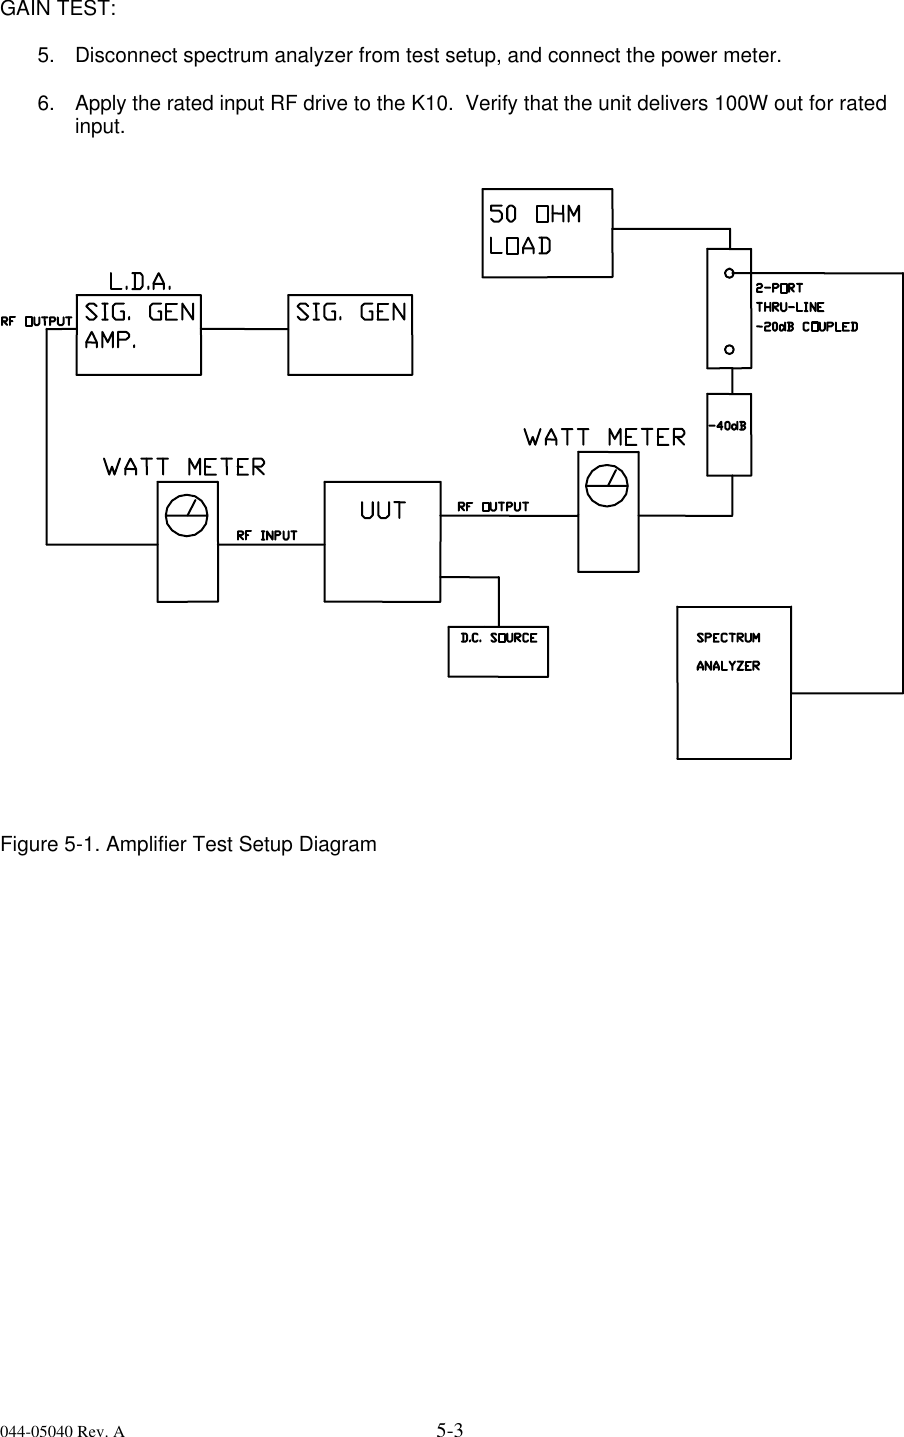 044-05040 Rev. A 5-3  GAIN TEST:  5. Disconnect spectrum analyzer from test setup, and connect the power meter.  6. Apply the rated input RF drive to the K10.  Verify that the unit delivers 100W out for rated input.      Figure 5-1. Amplifier Test Setup Diagram  